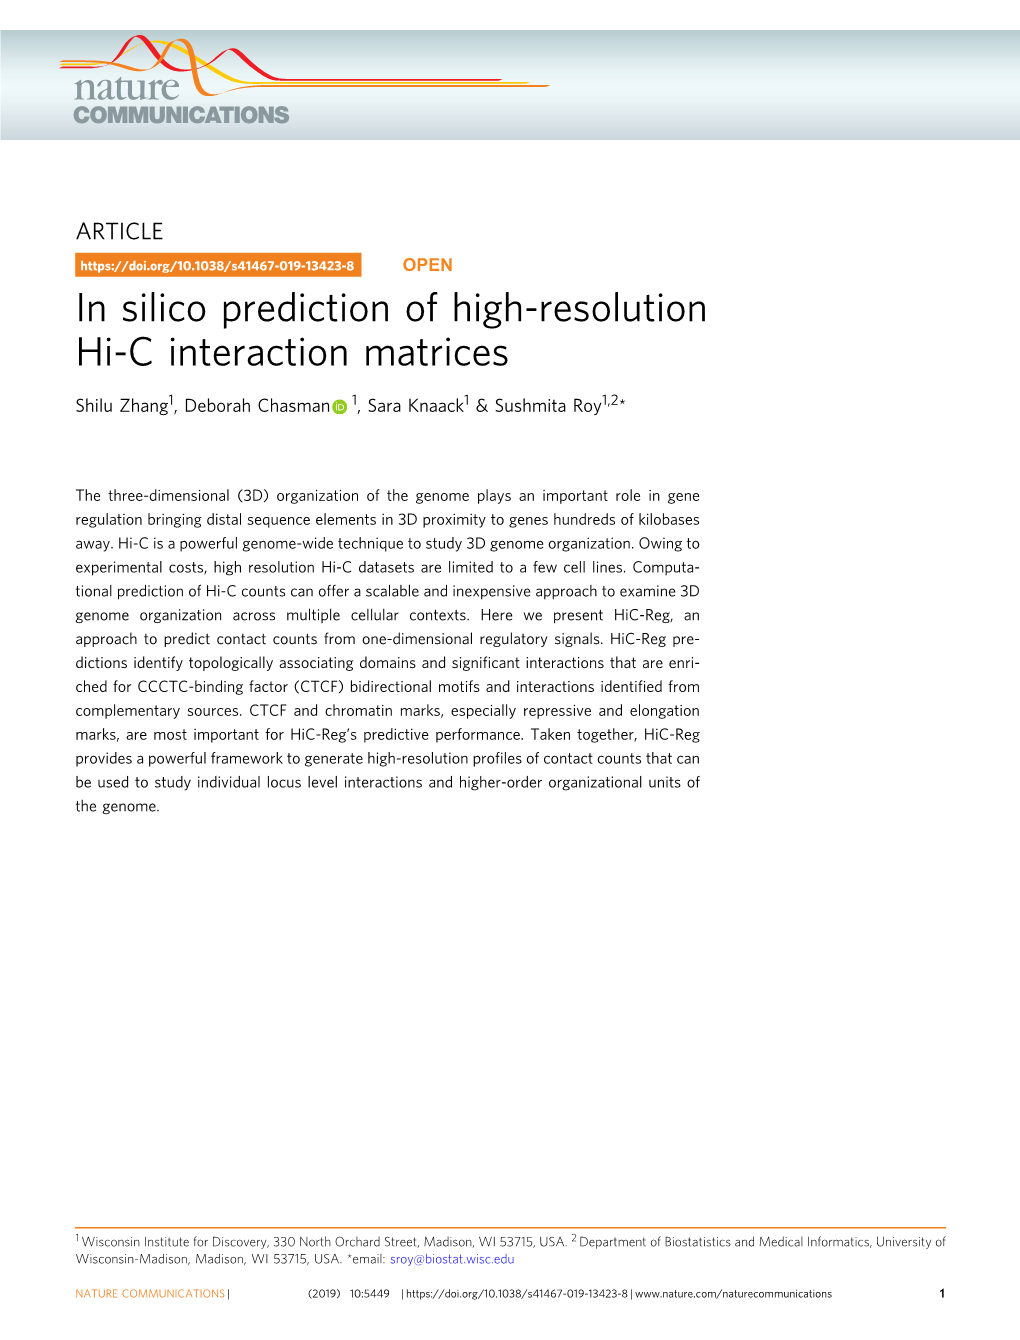 In Silico Prediction of High-Resolution Hi-C Interaction Matrices